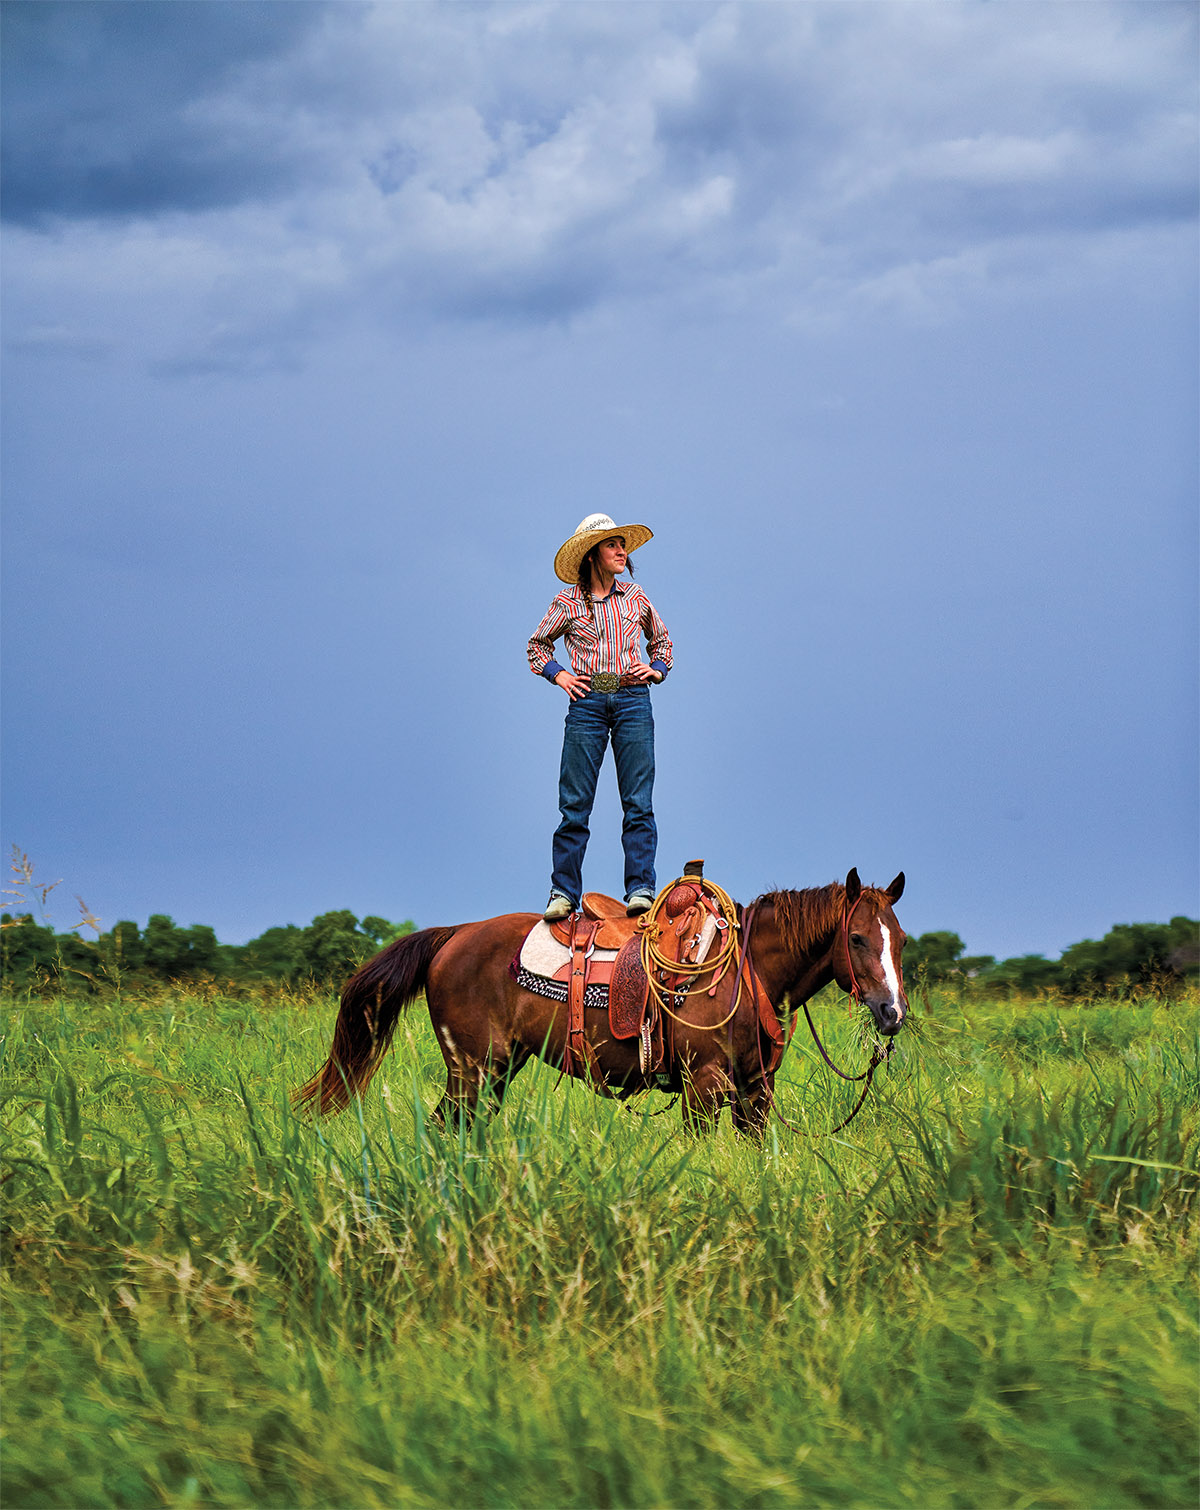 A woman in a brightly-colored shirt and cowboy hat stands on top of a brown horse in a green field